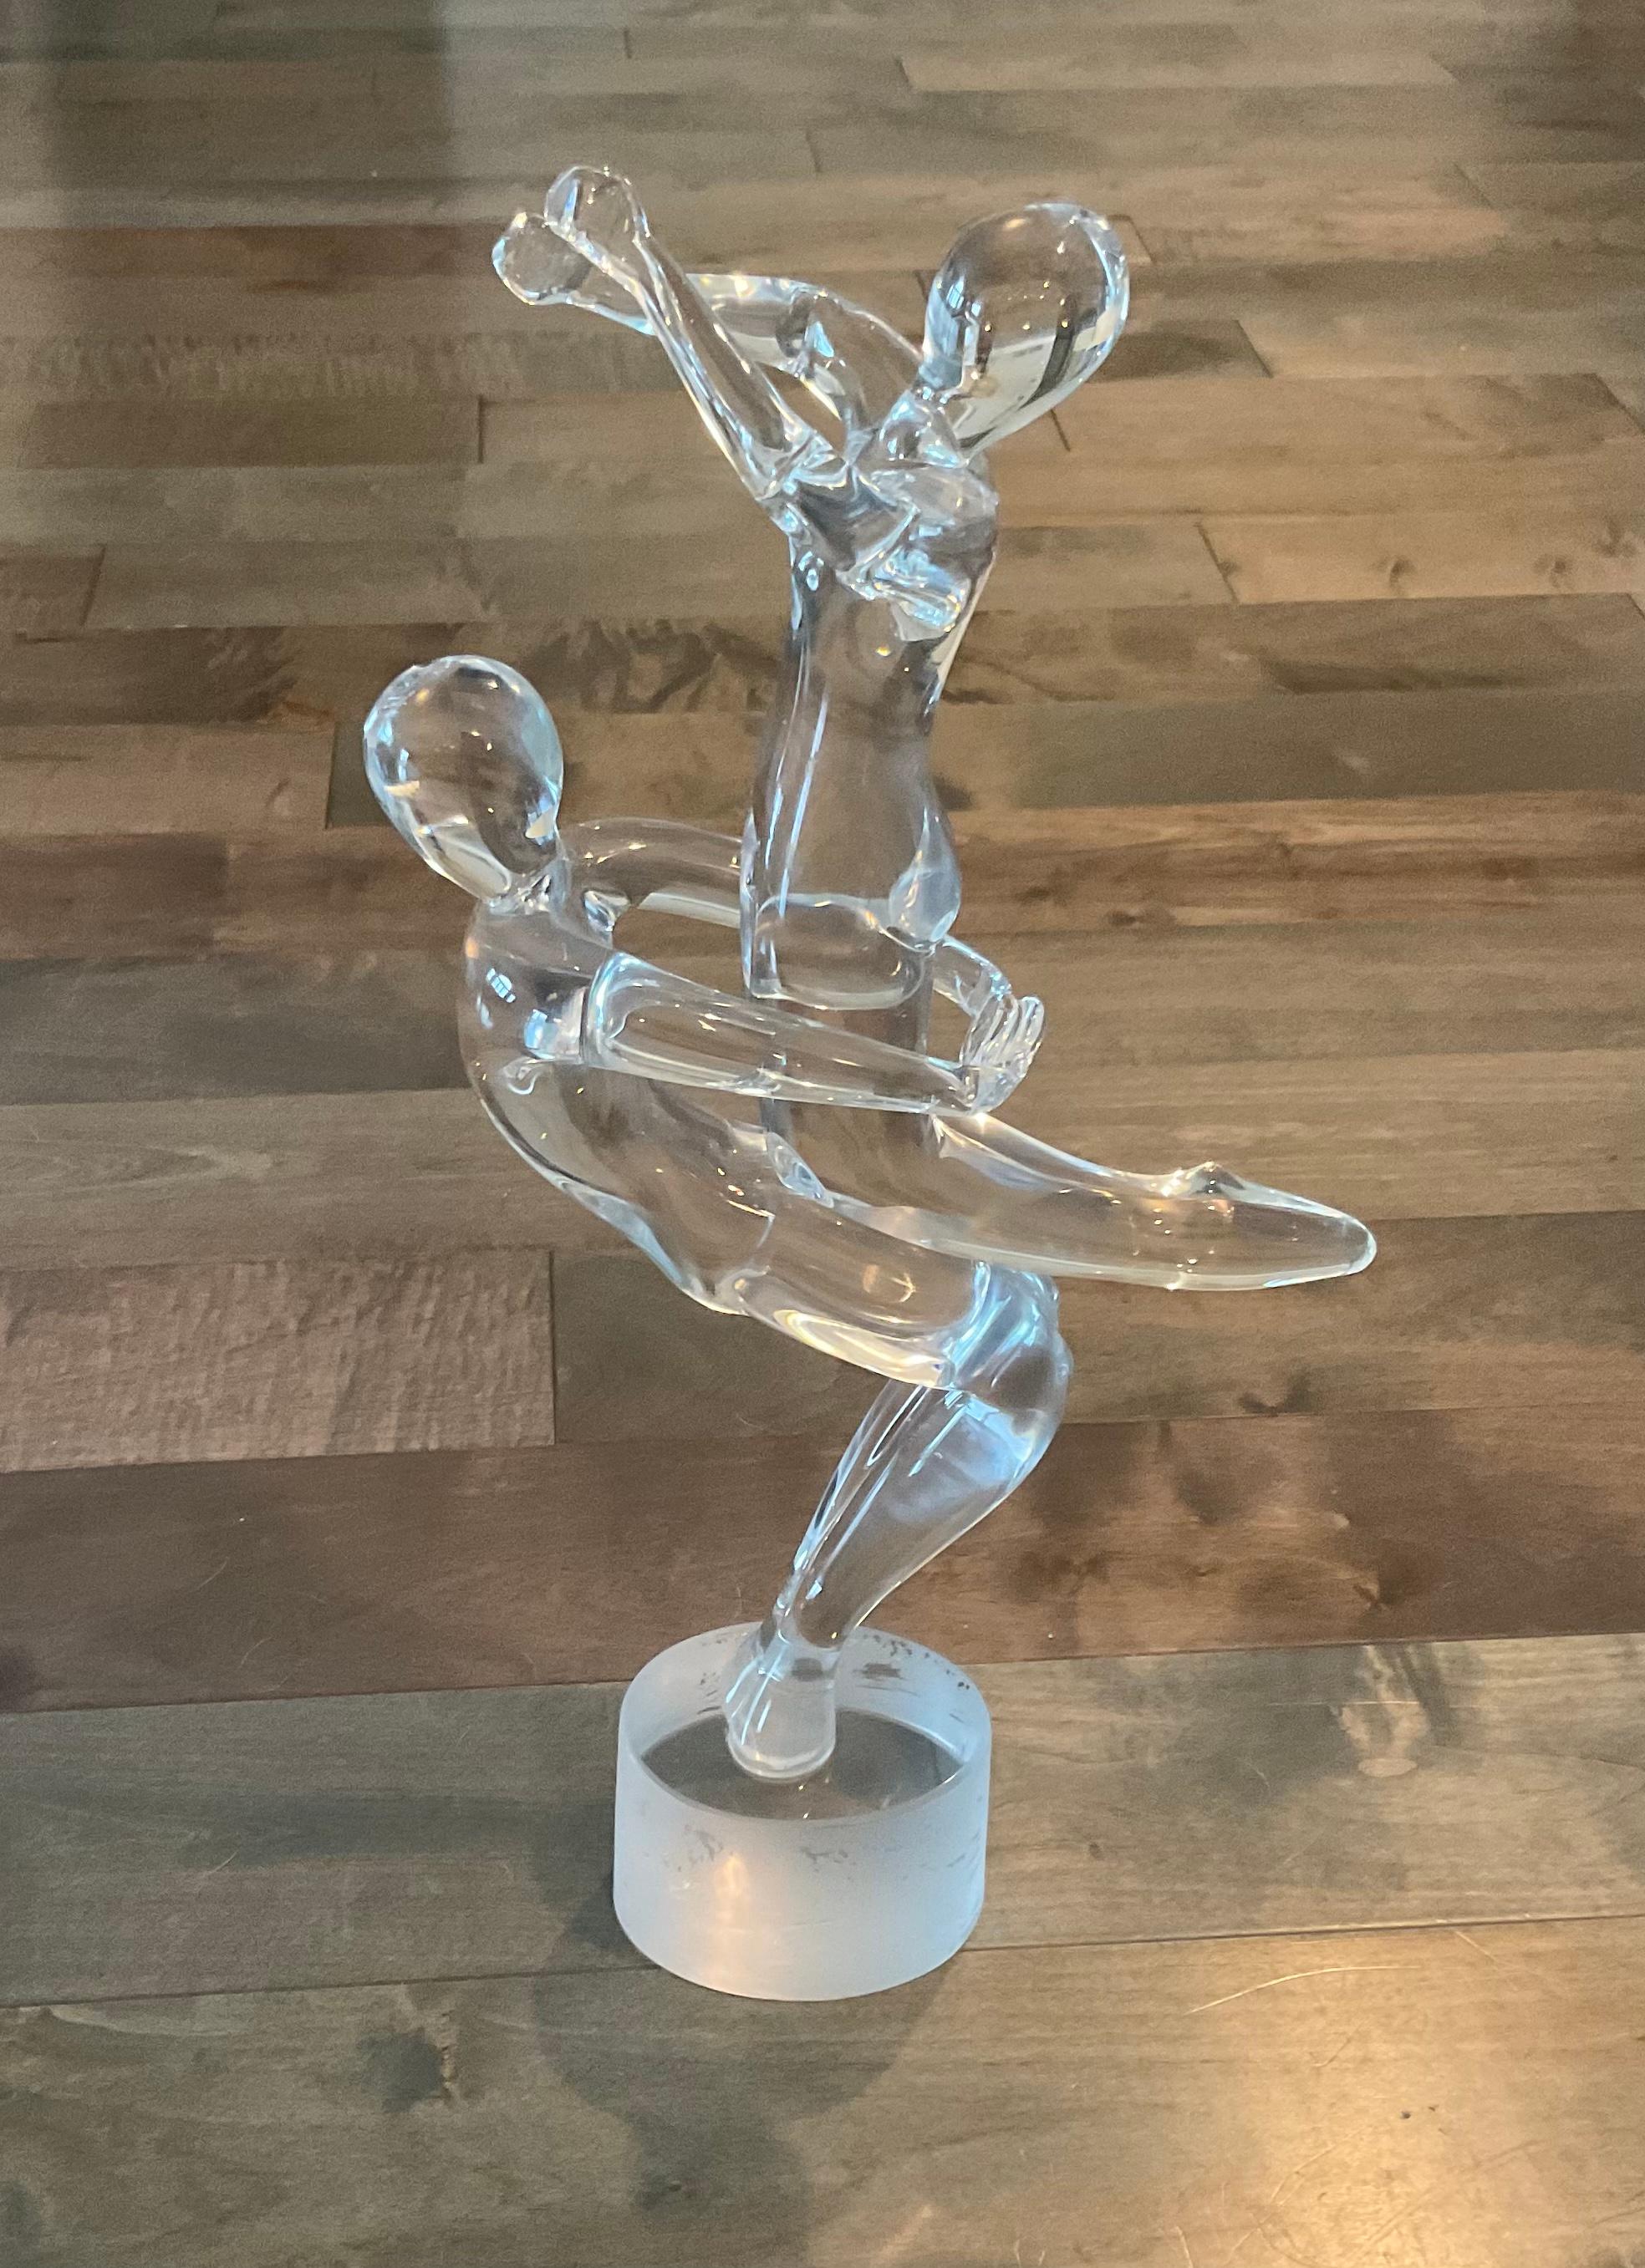 Large pair Renato Anatra Murano Art Glass dancer figures sculpture gymnasts Signed by the artist.